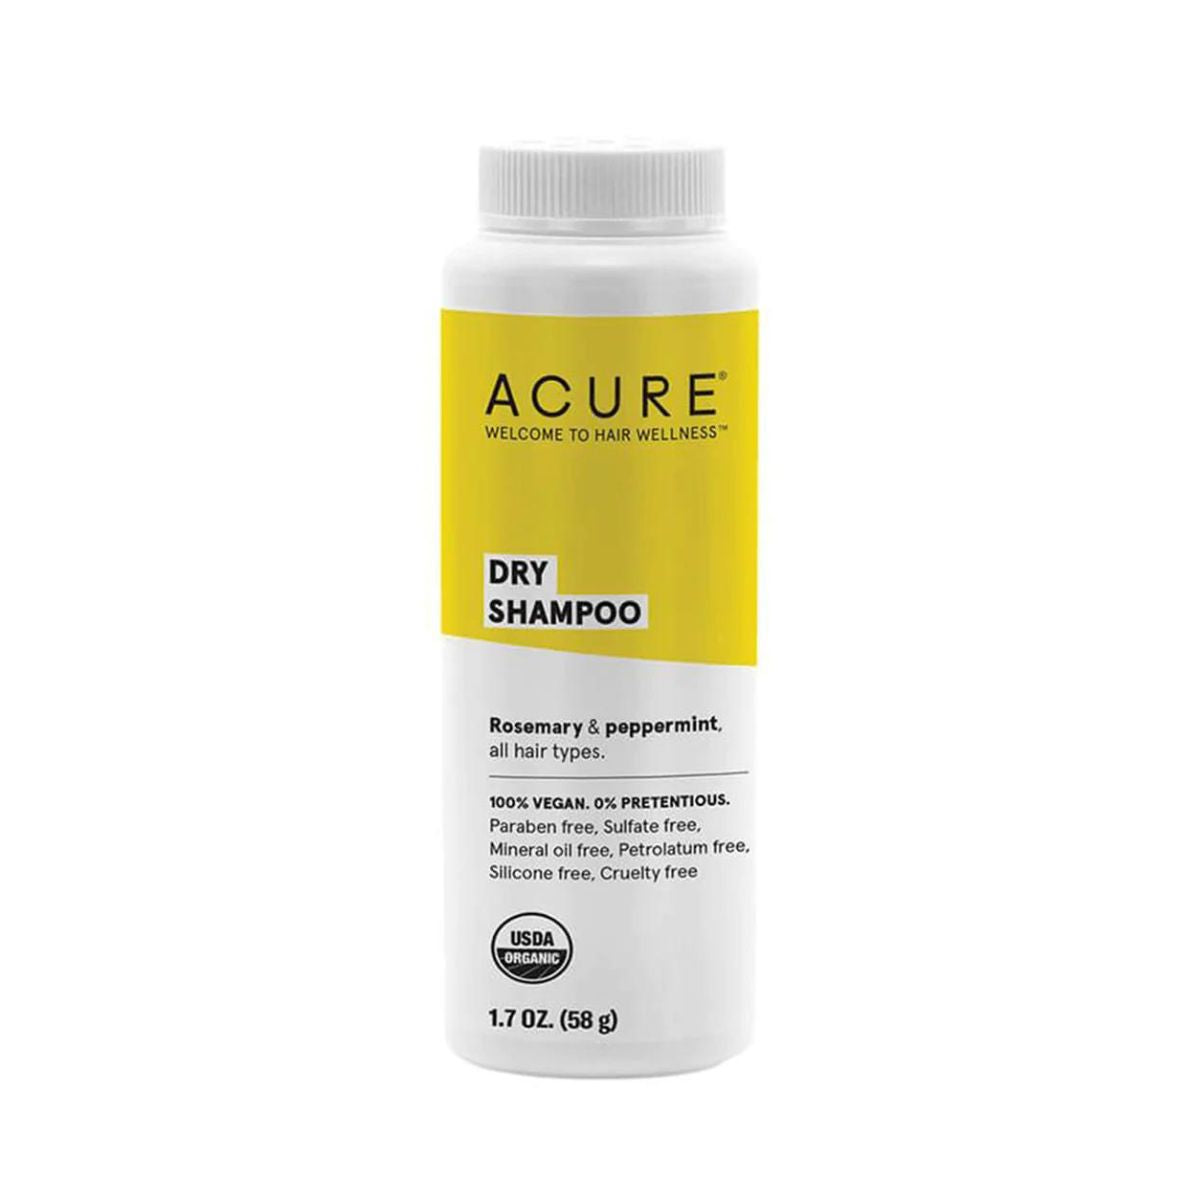 Acure Dry Shampoo - All Hair Types 48g